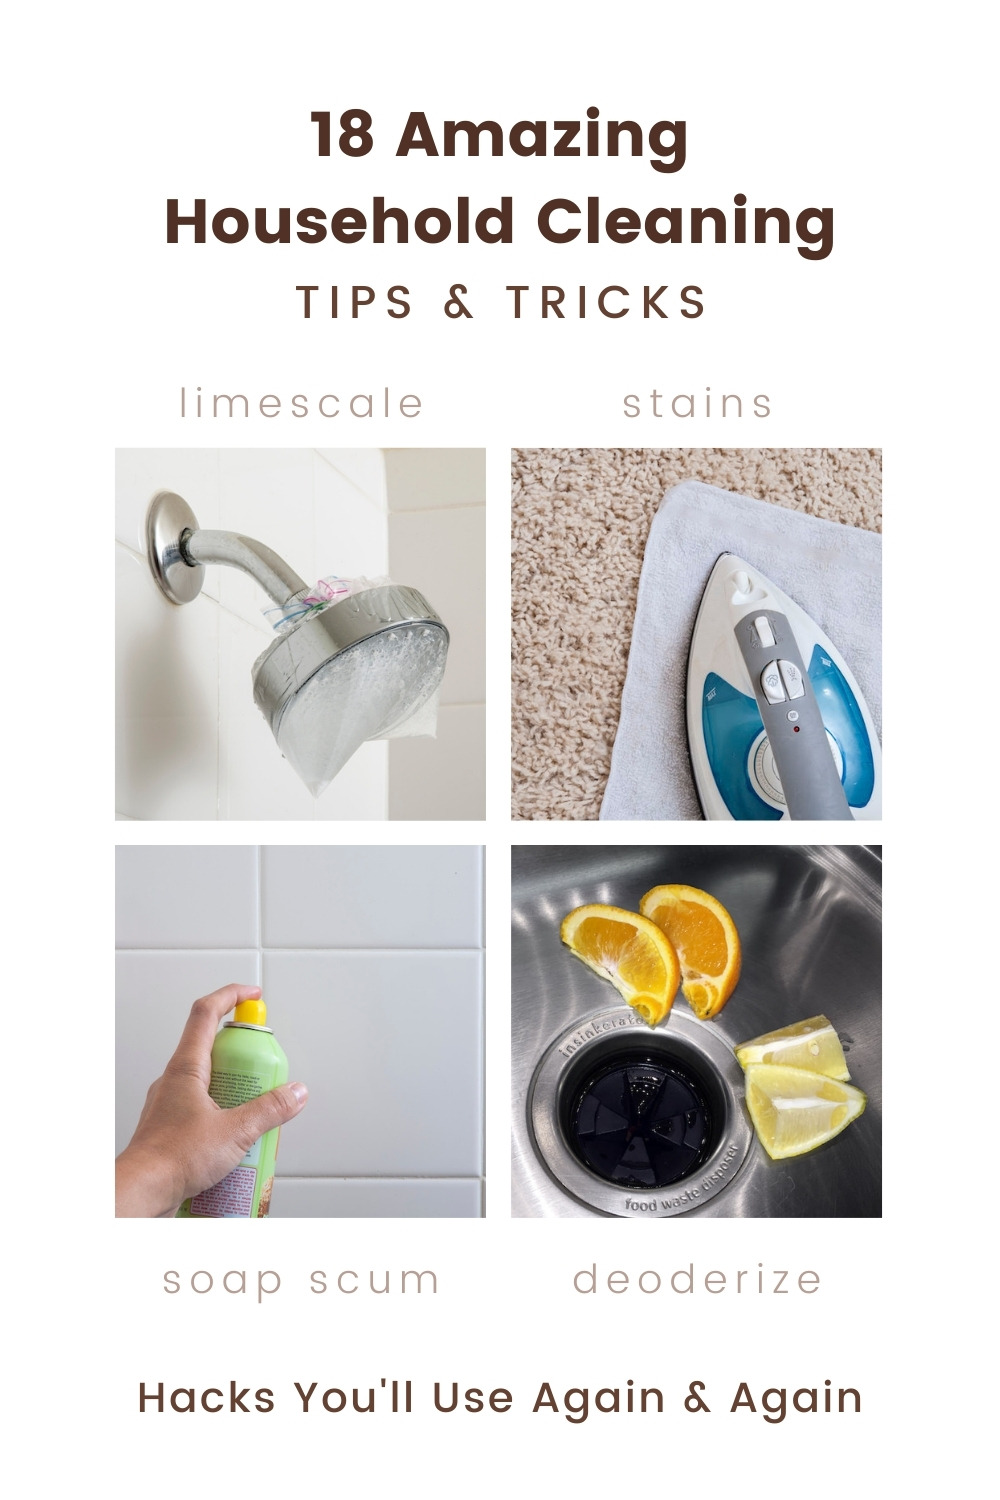 Household Cleaning Tips and tricks